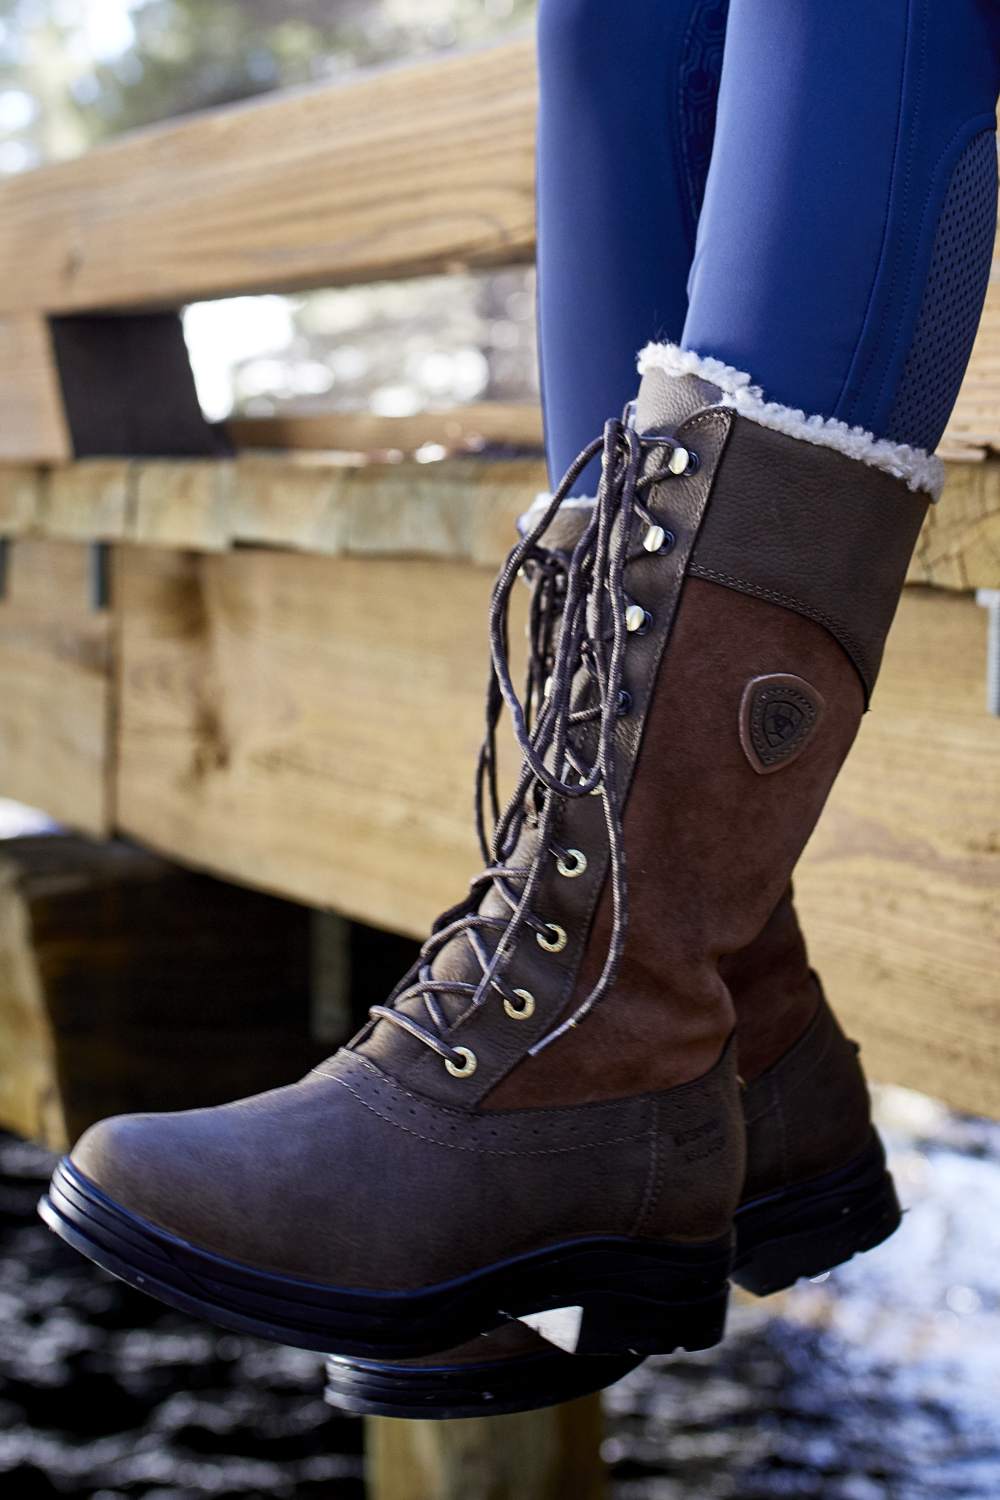 Ariat Wythburn Insulated Waterproof Boots in Java